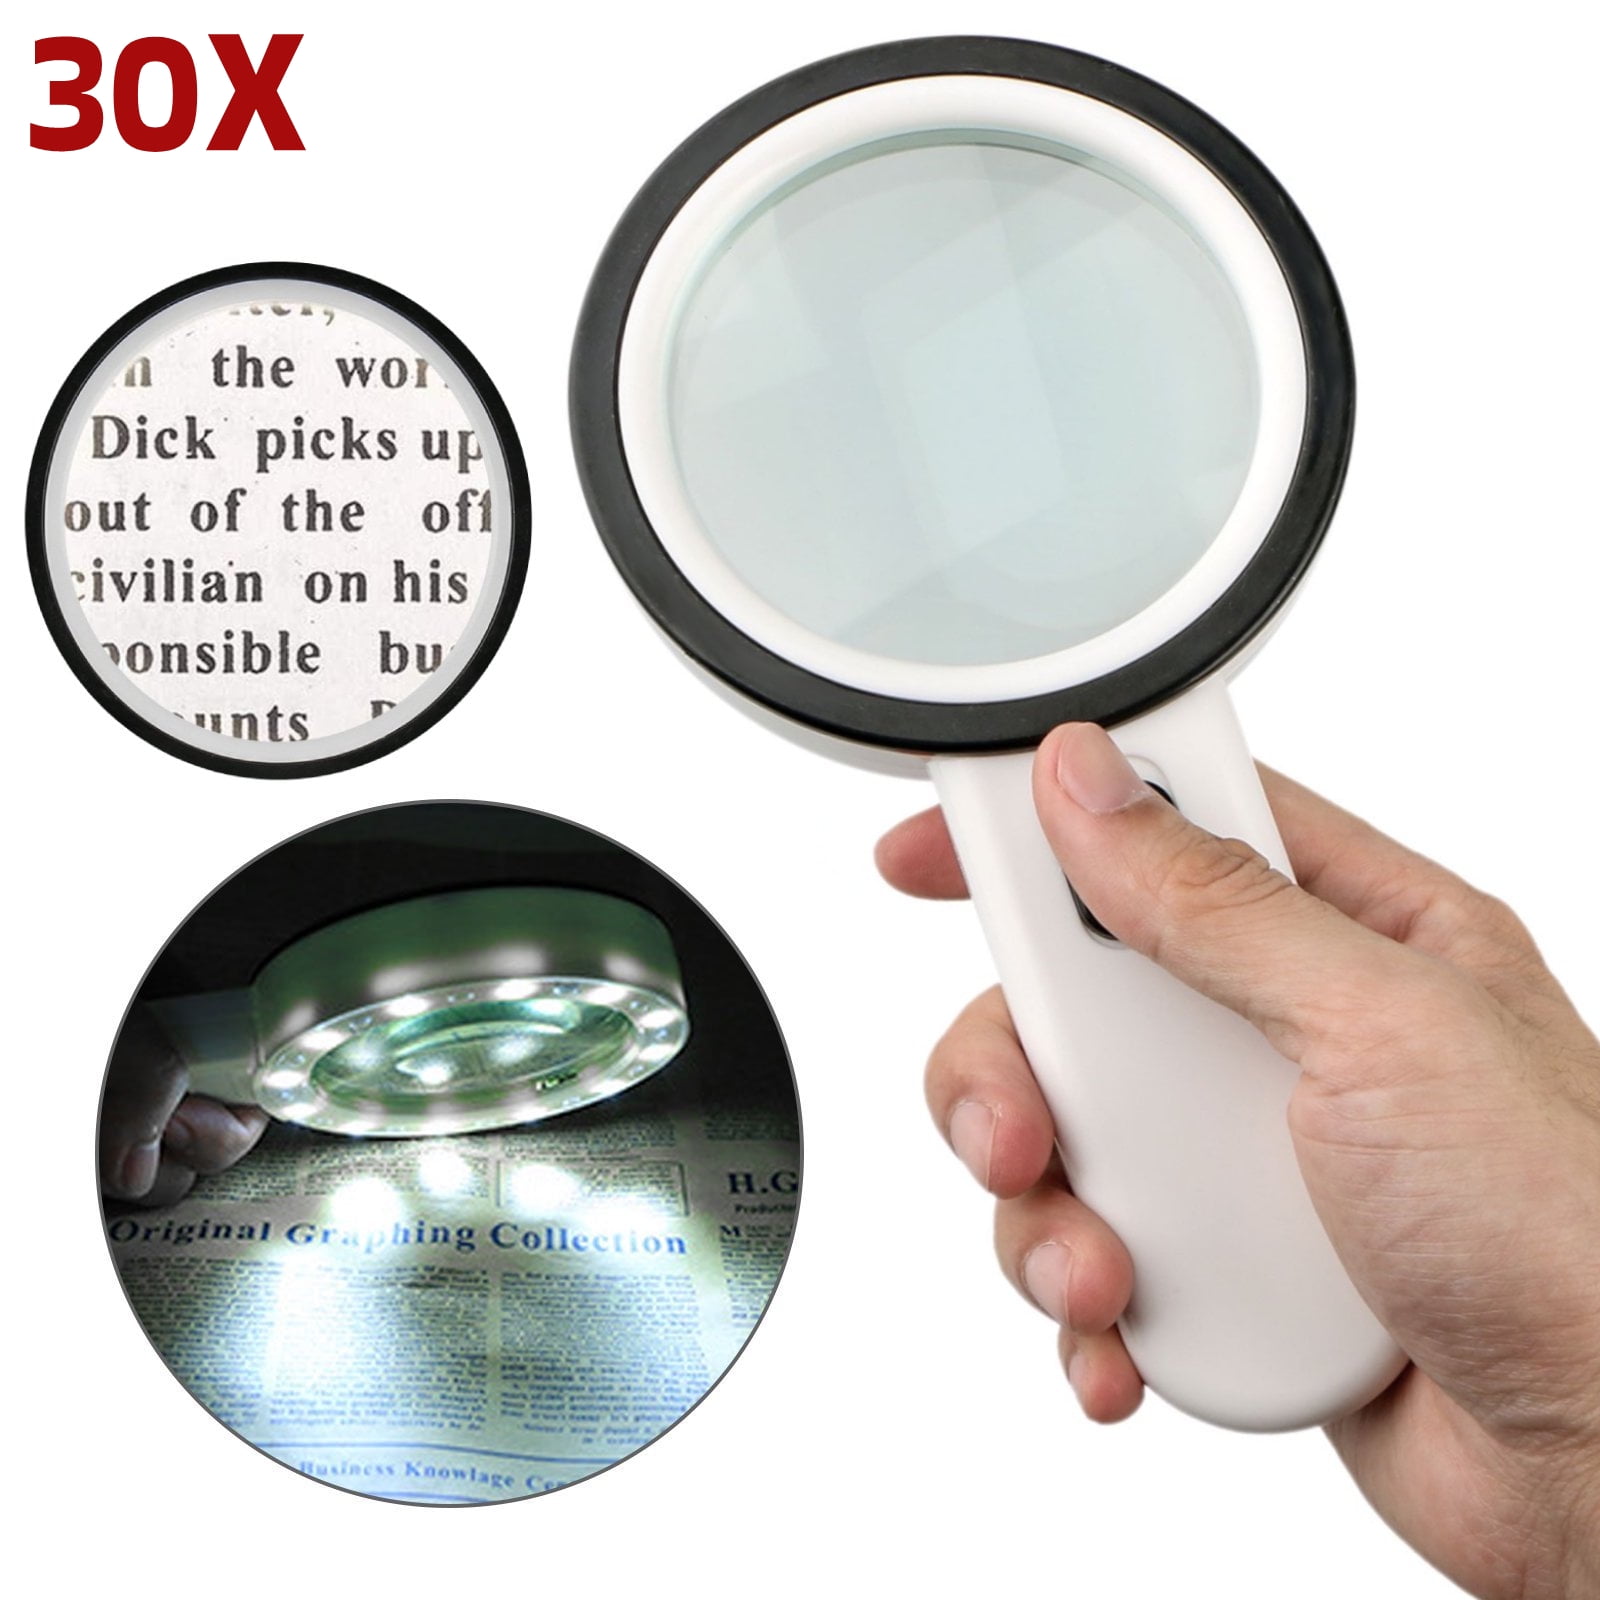 20X Magnifier Magnification Handheld Reading Magnifying Glass Low Vision Aid